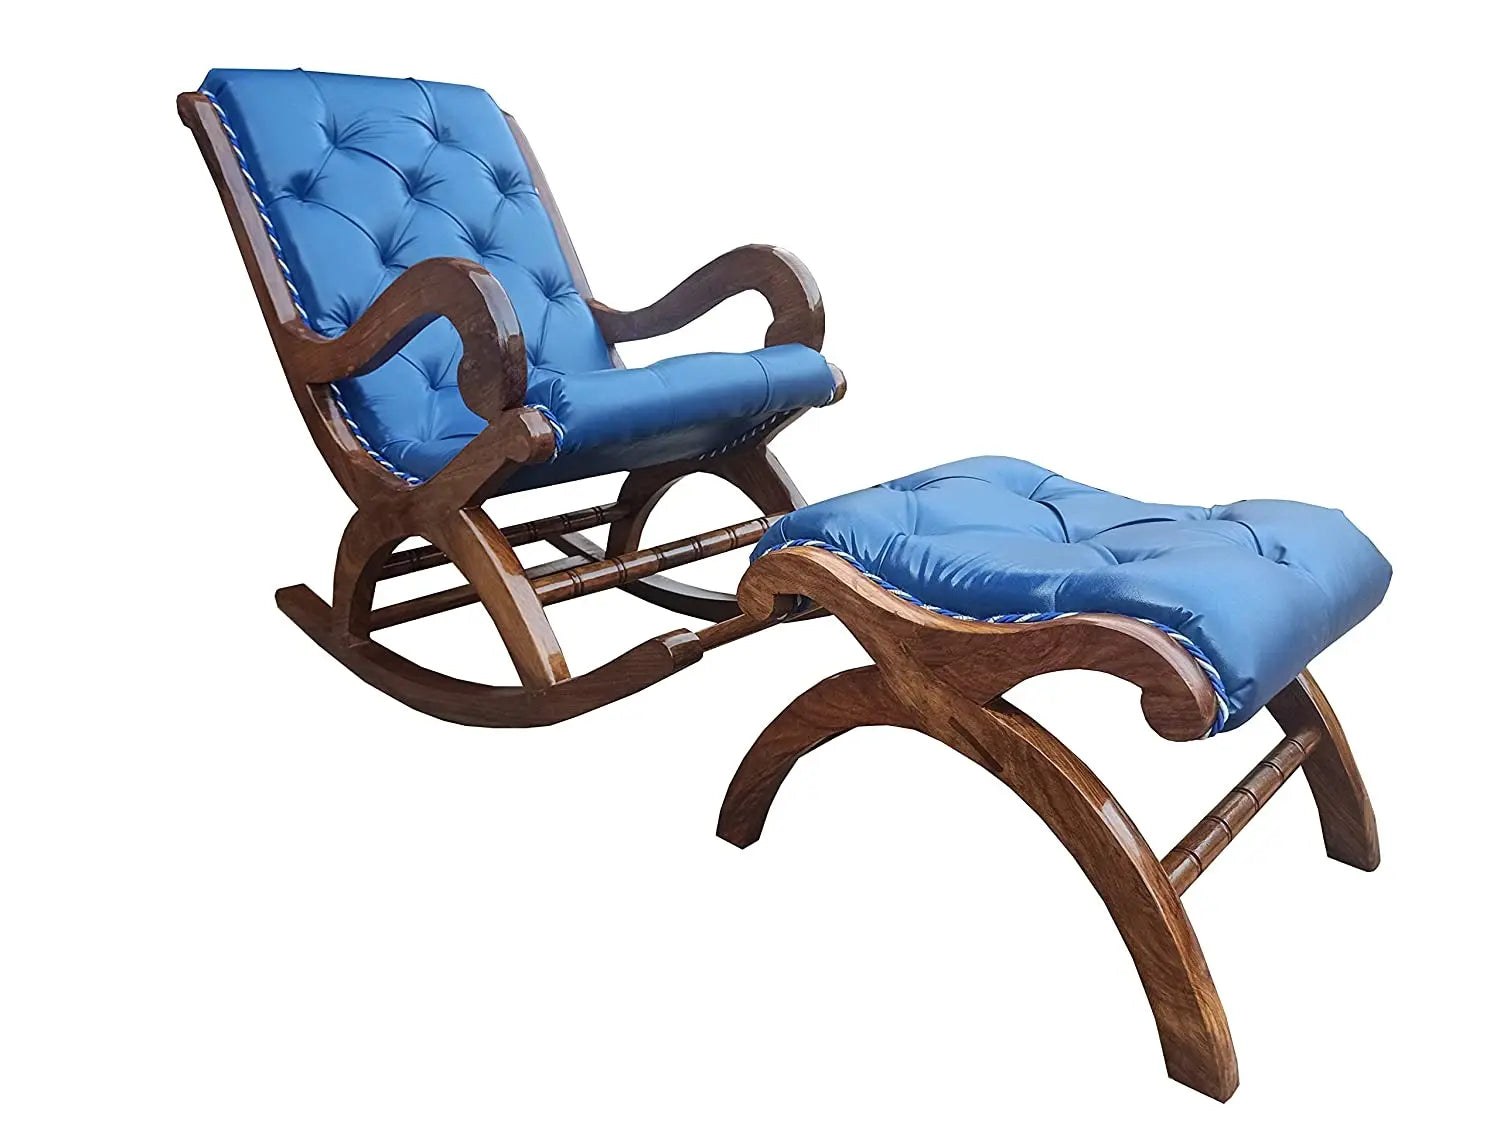 Rocking chair Buck- Wooden Handmade Rocking chair with Cushion Foot Rest Pure Wood Chair with Stool Rolling Lazy Relaxing Chair for Living room Furneez